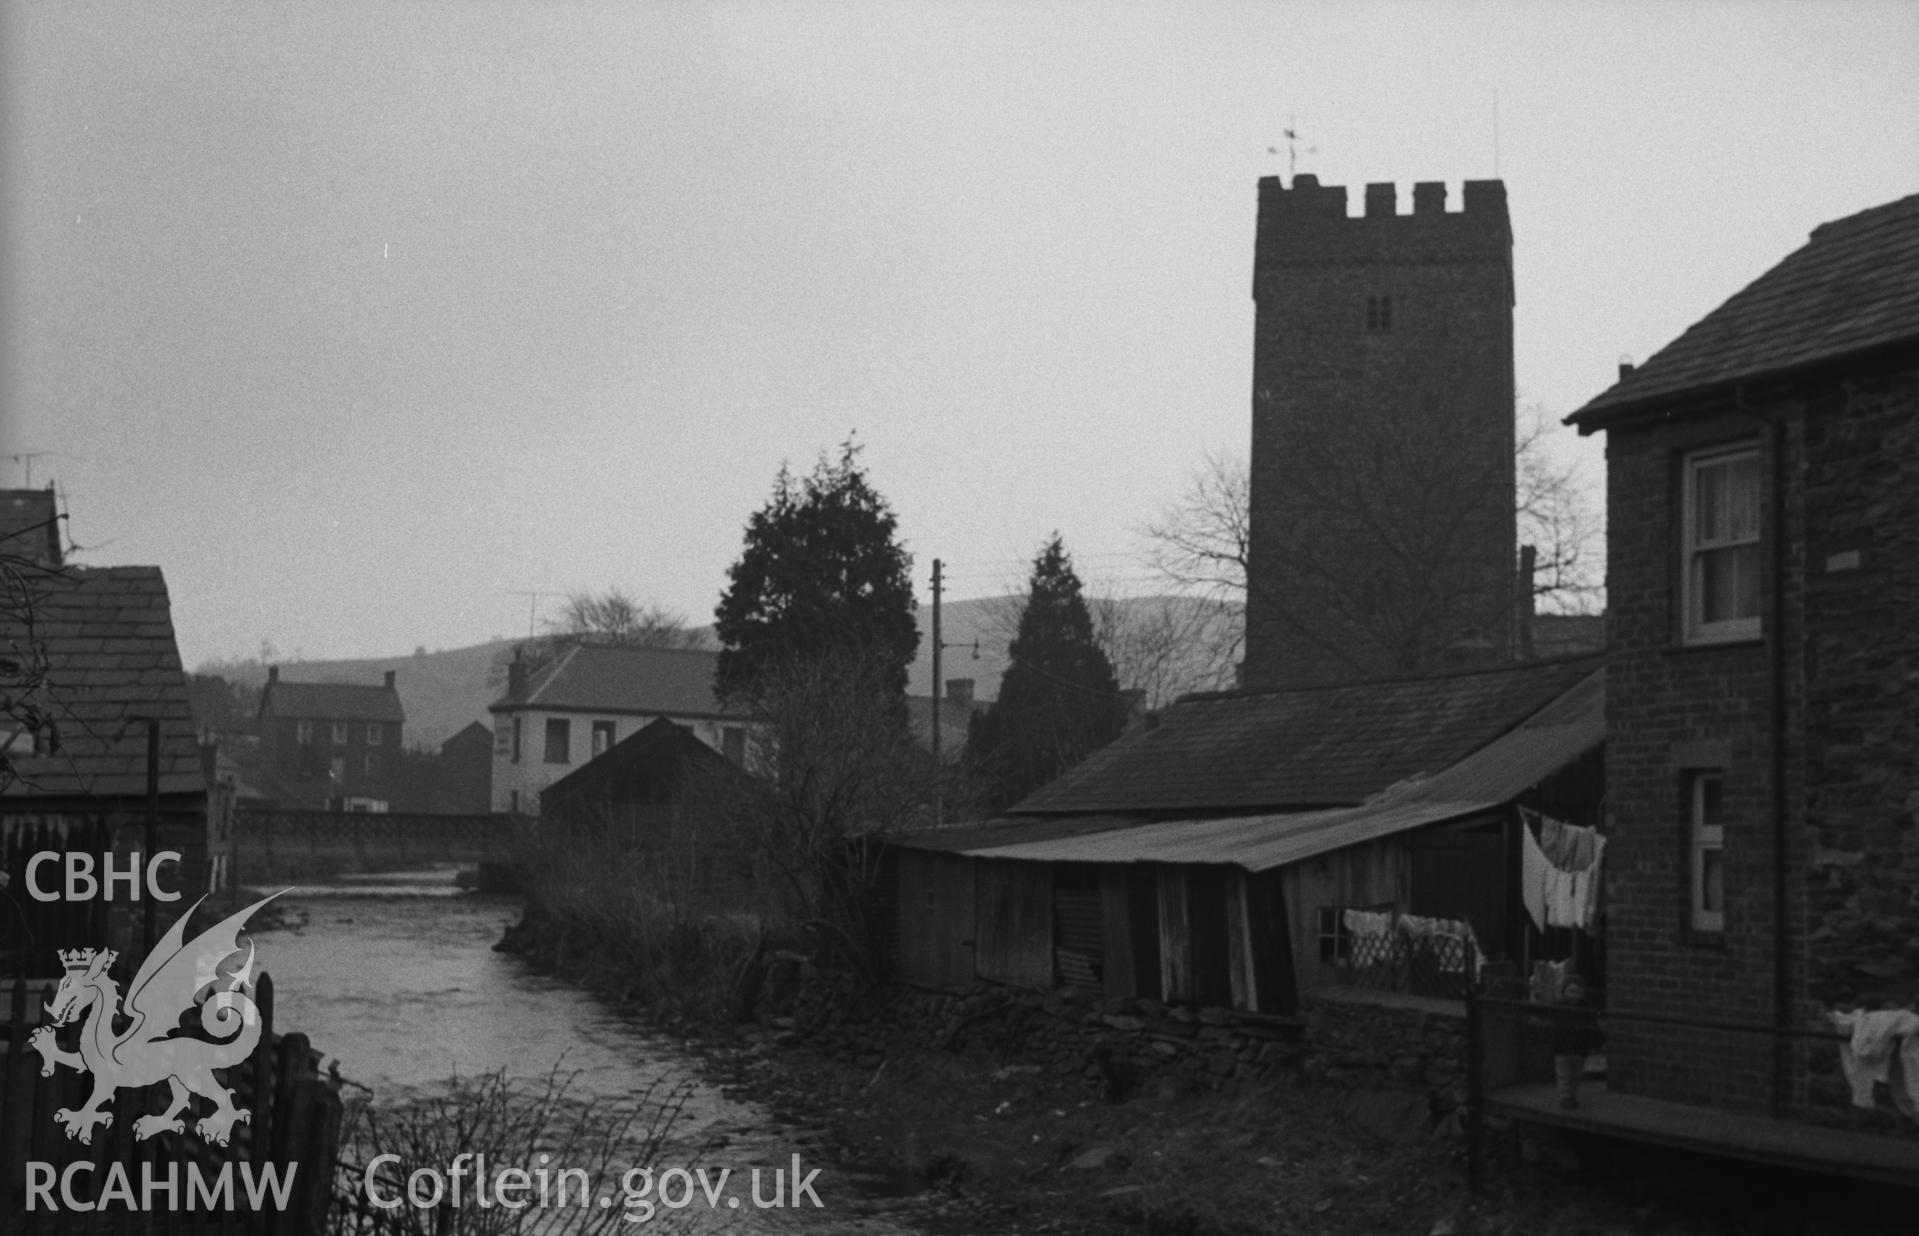 Digital copy of black & white negative showing the church from the footbridge across the Afon Brennig. Photographed in April 1963 by Arthur O. Chater from Grid Reference SN 6791 5964, looking north east.